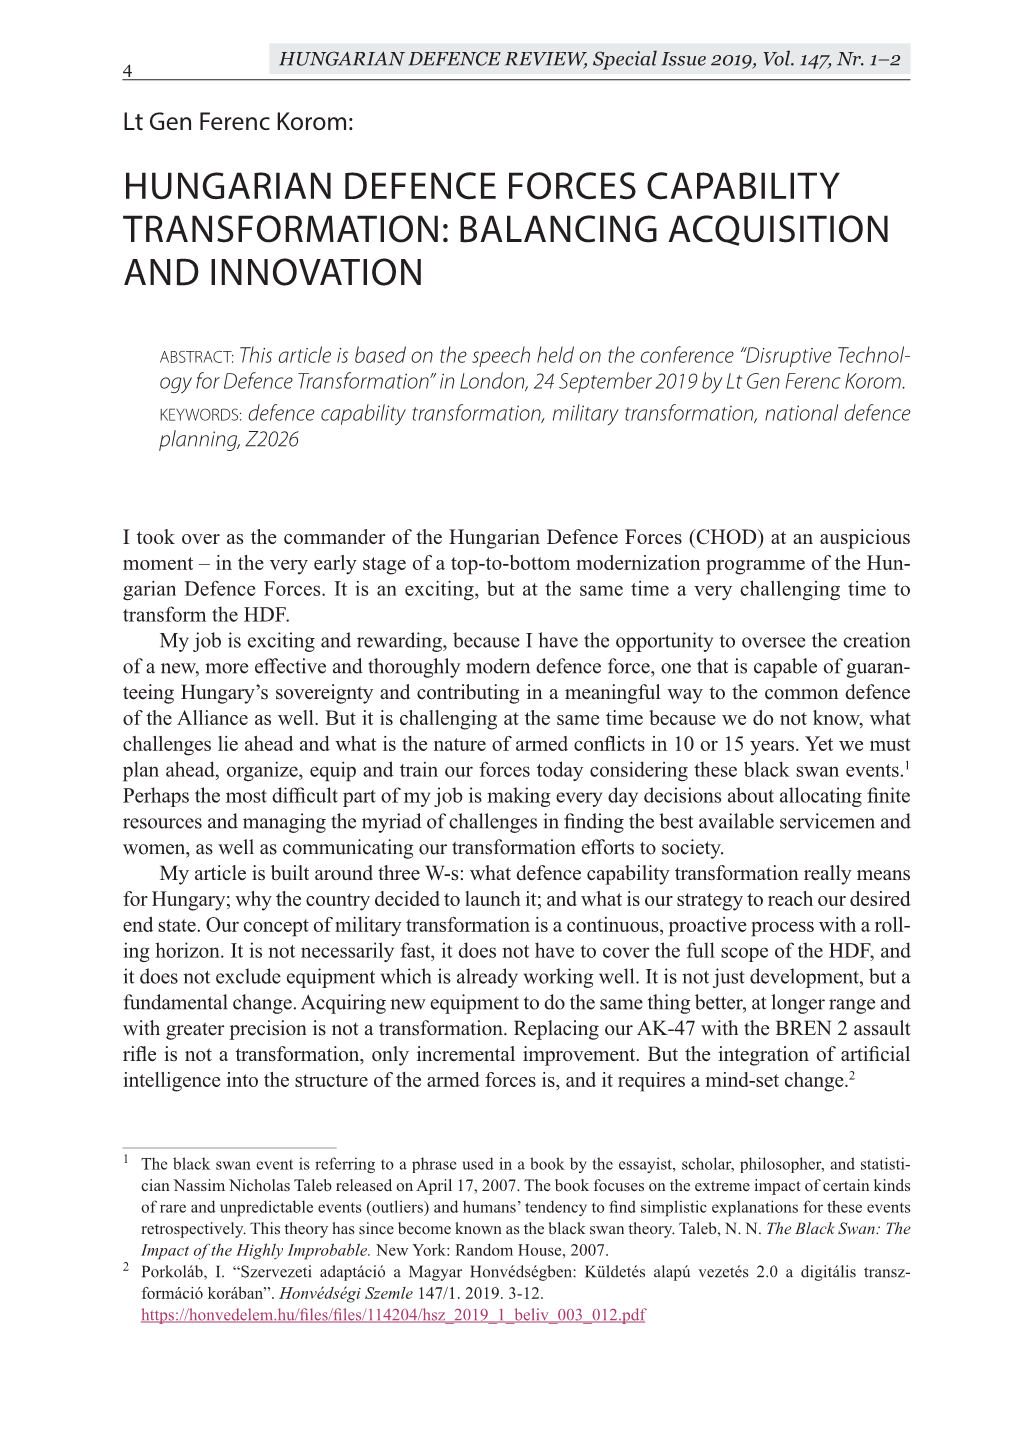 Hungarian Defence Forces Capability Transformation: Balancing Acquisition and Innovation